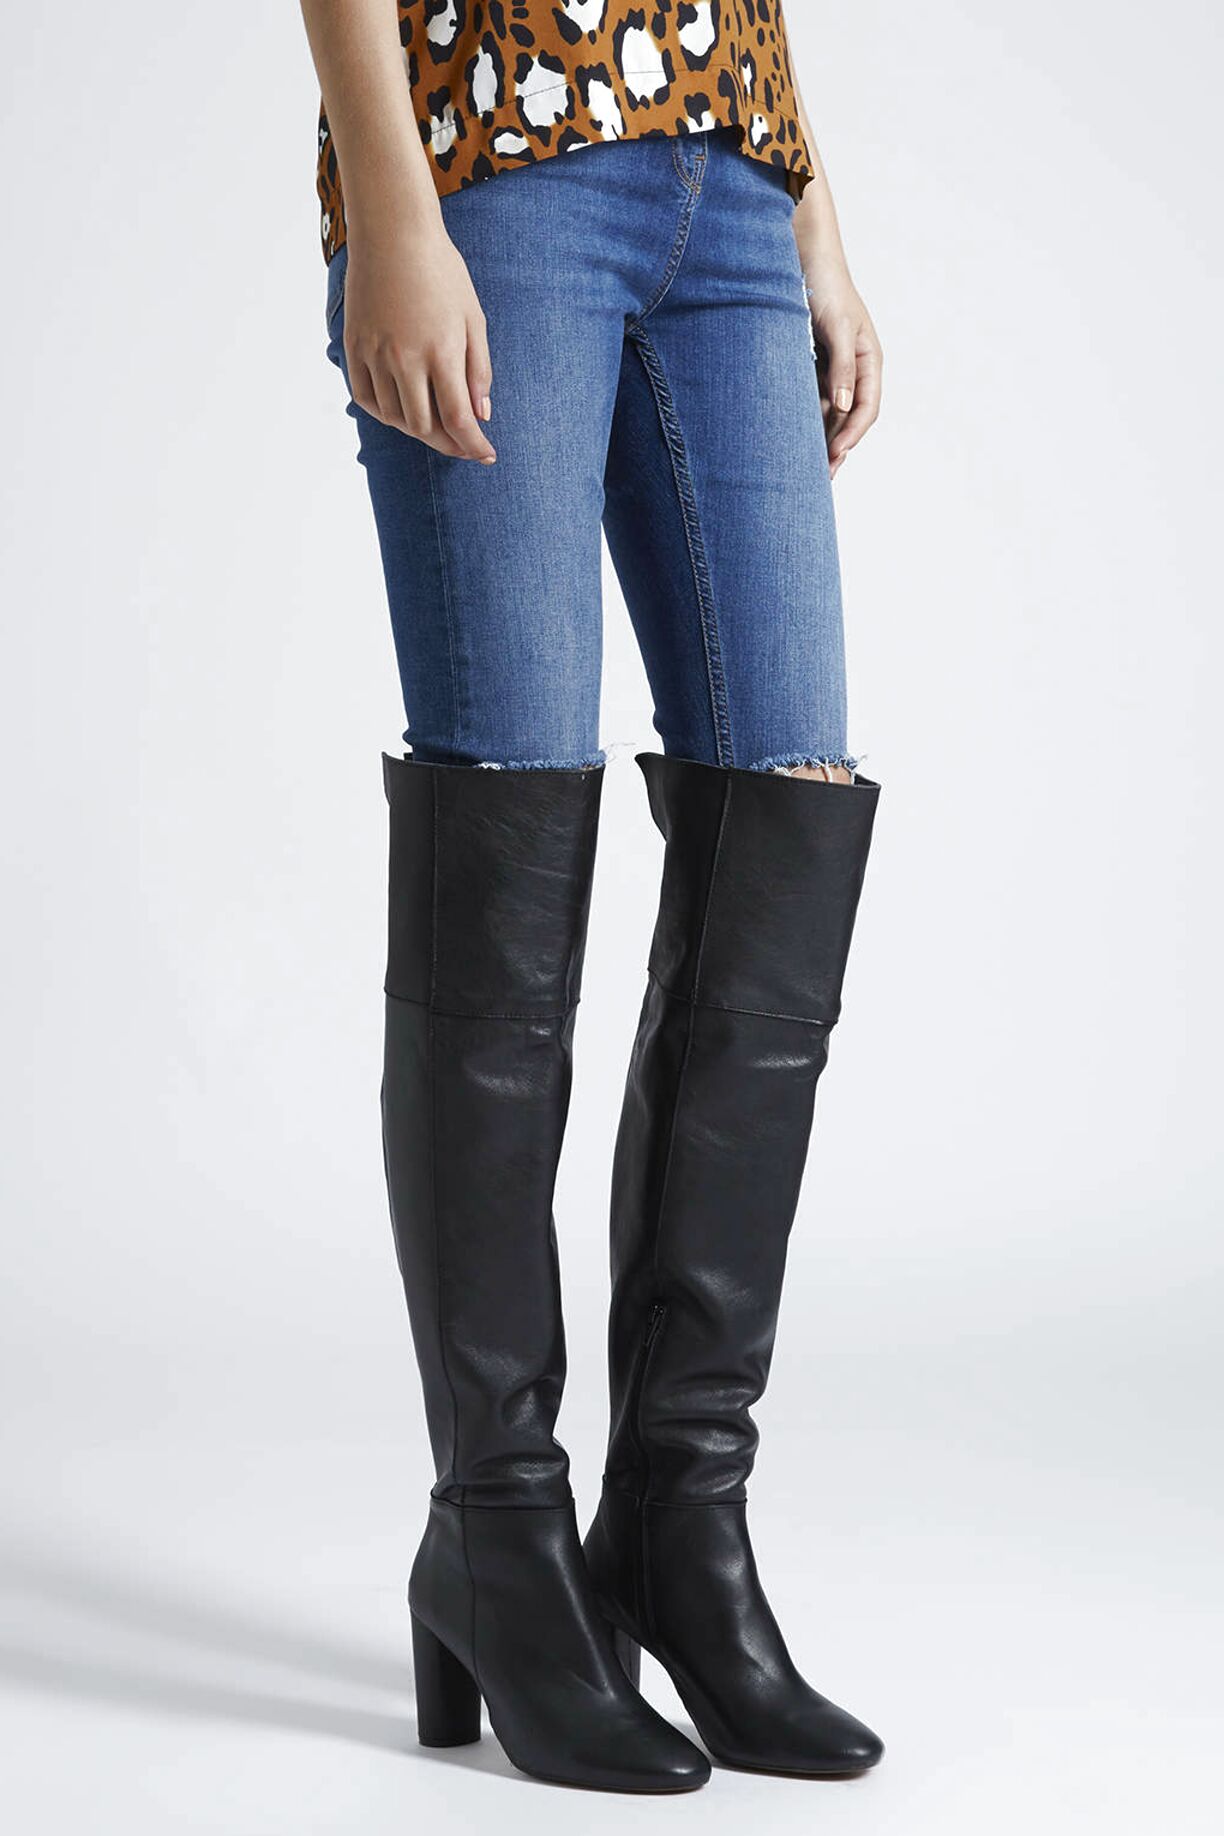 Topshop Thigh Boots for sale in UK 